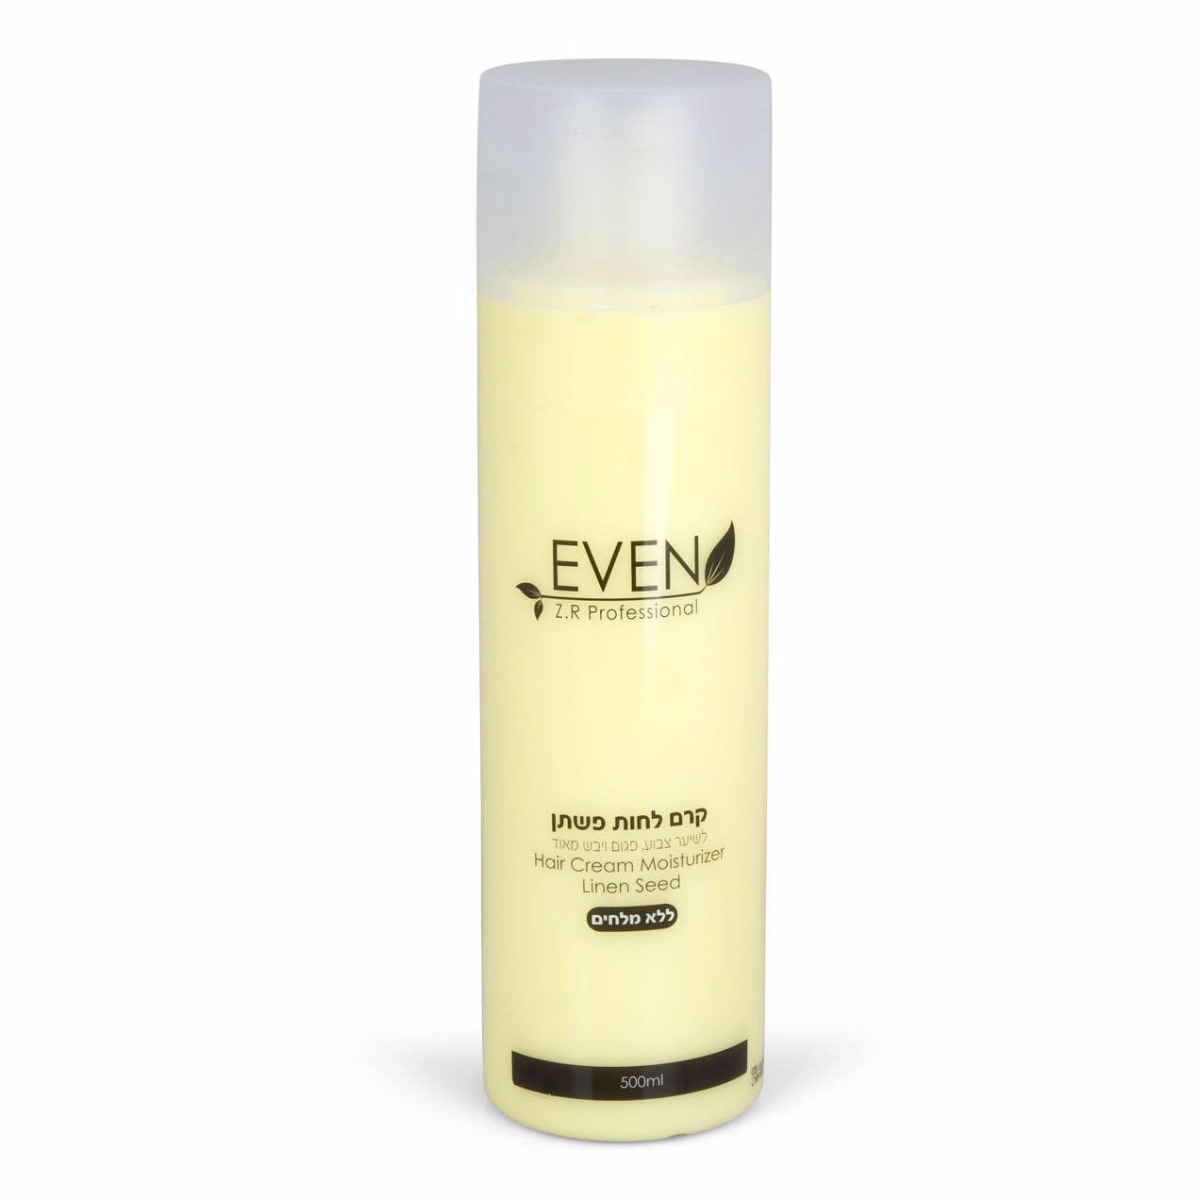 Even Moisturizing Hair Cream Enriched with Flaxseed Oil - Colored / Dry / Damaged Hair - 1